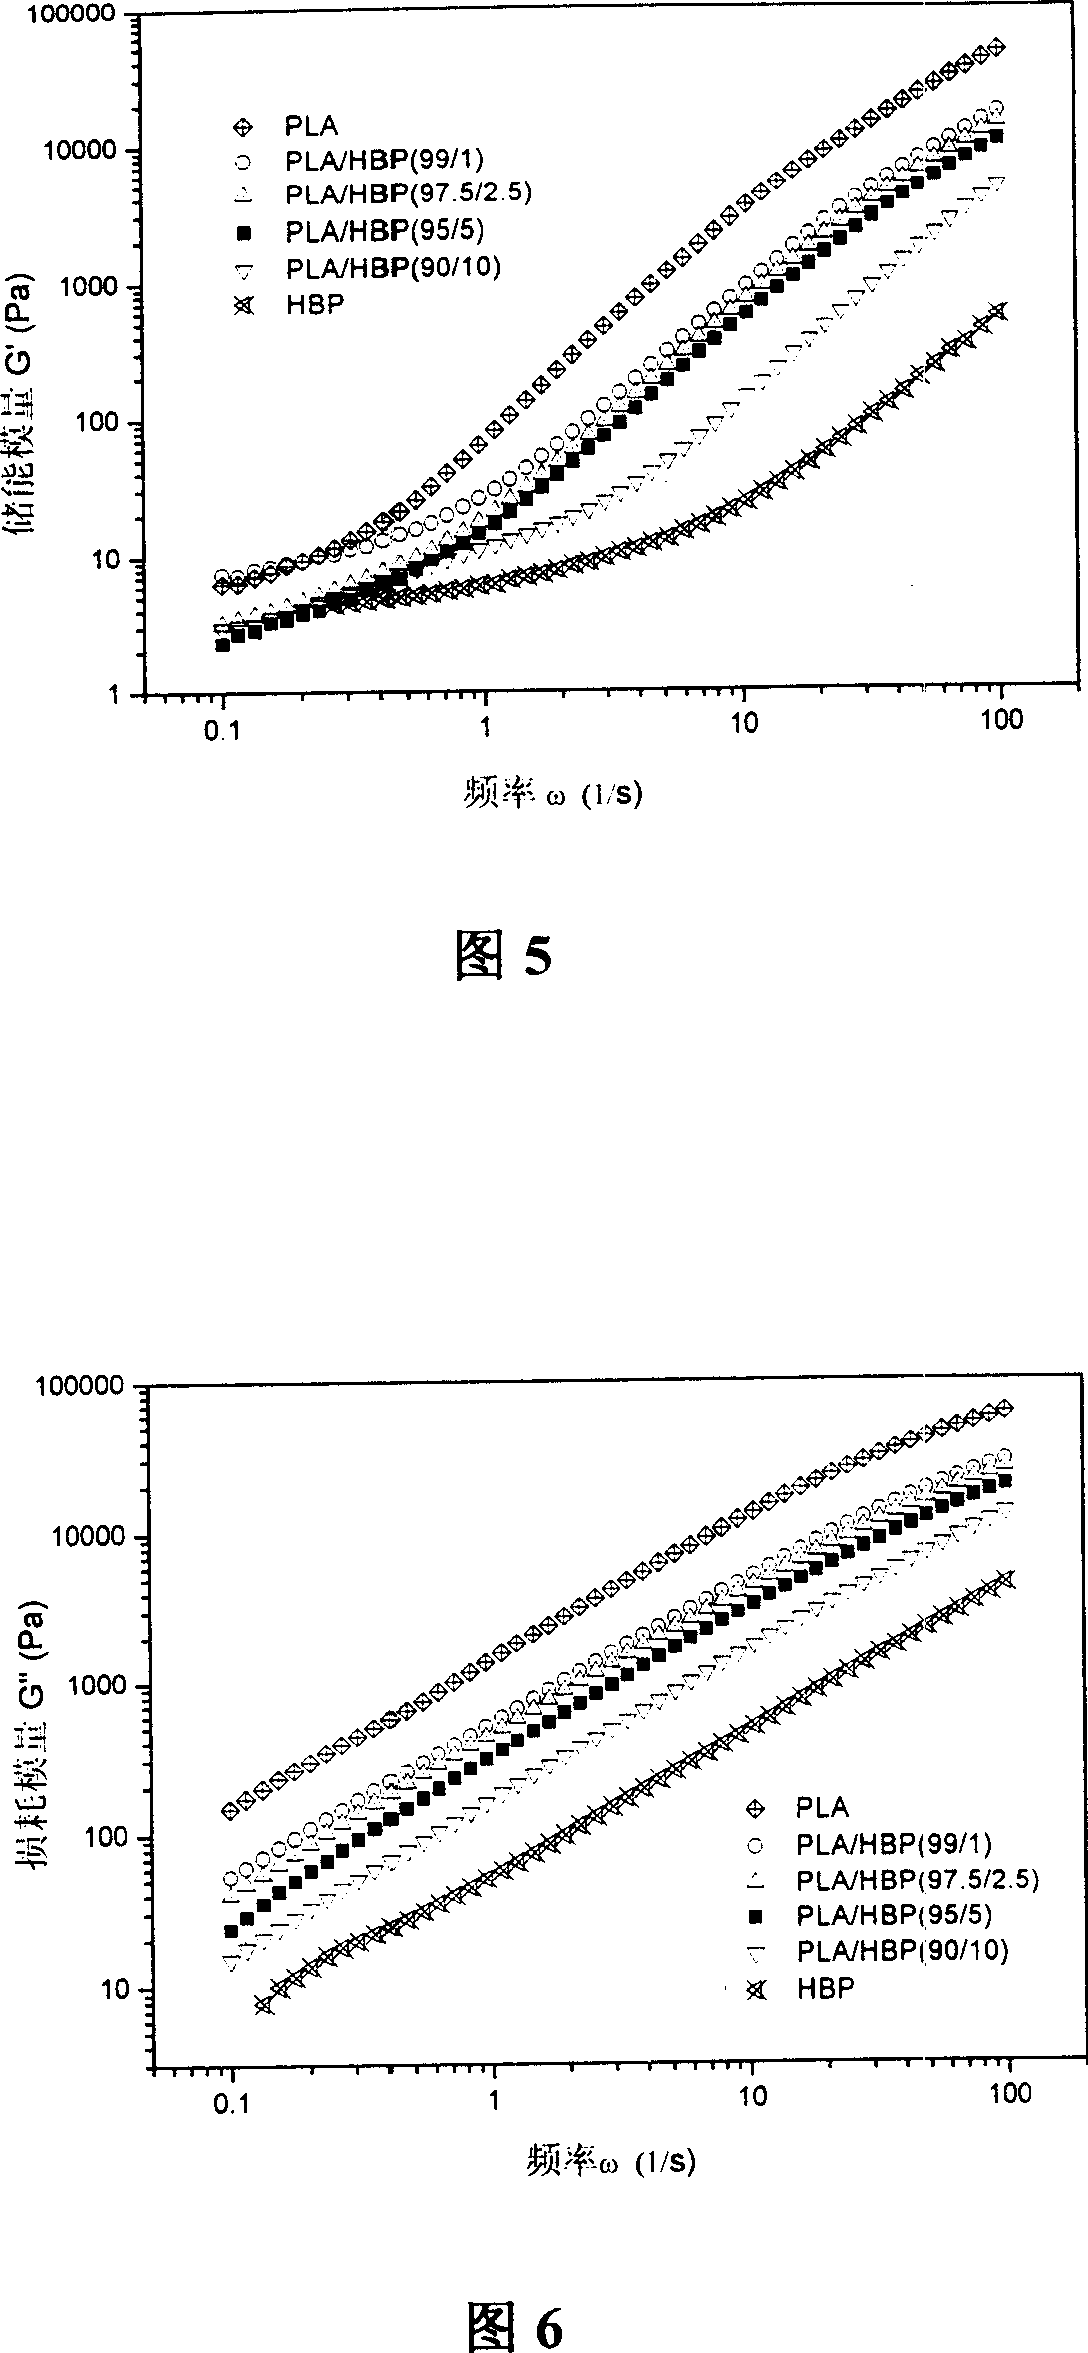 Method for modifying polylactic acid using superbranched polymer